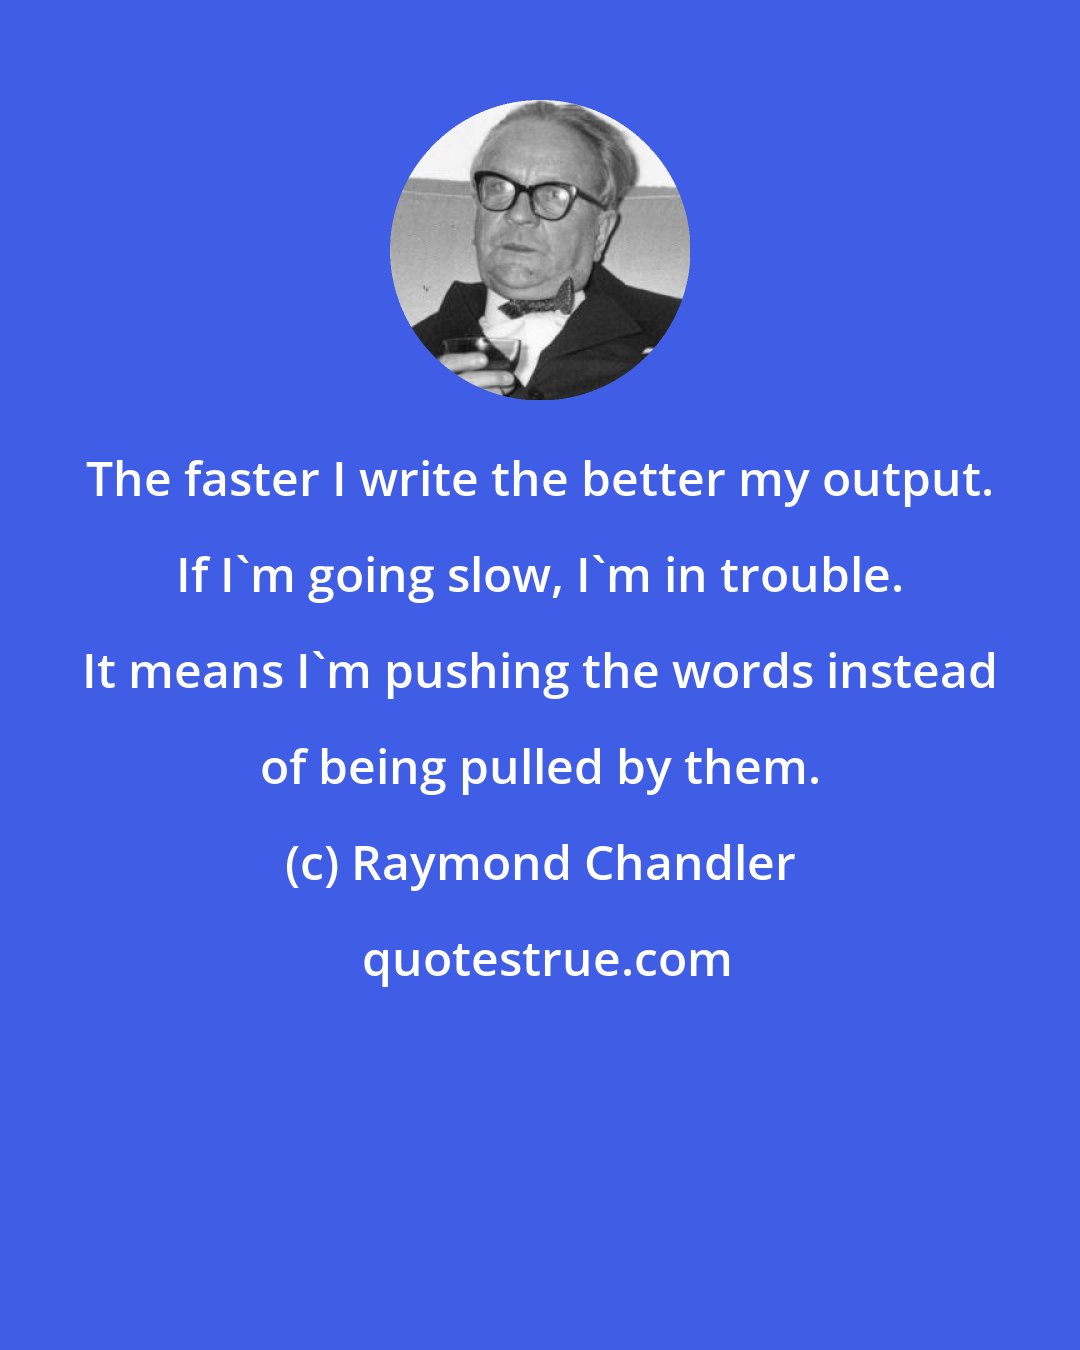 Raymond Chandler: The faster I write the better my output. If I'm going slow, I'm in trouble. It means I'm pushing the words instead of being pulled by them.